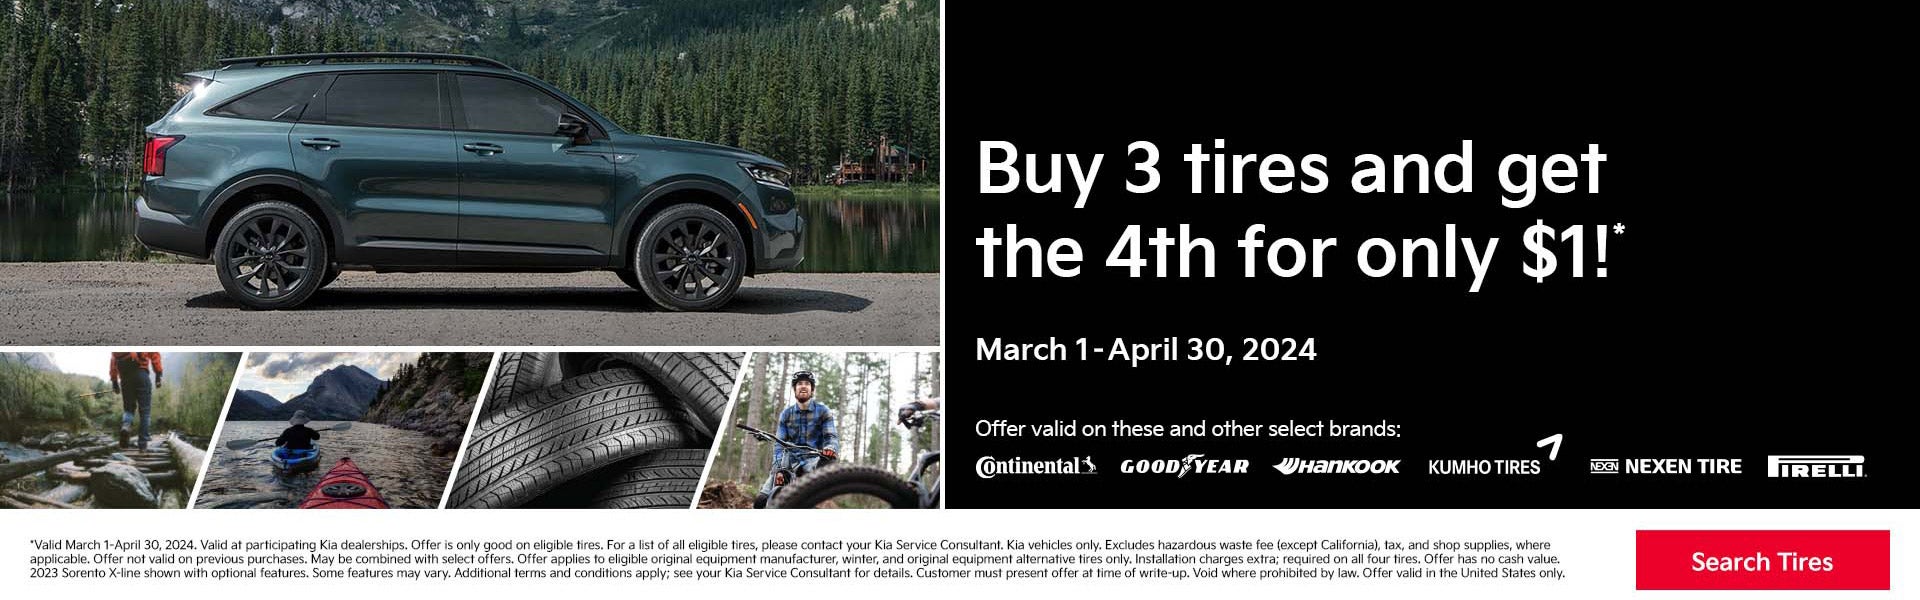 Buy 3 Tires and get the 4th for $1